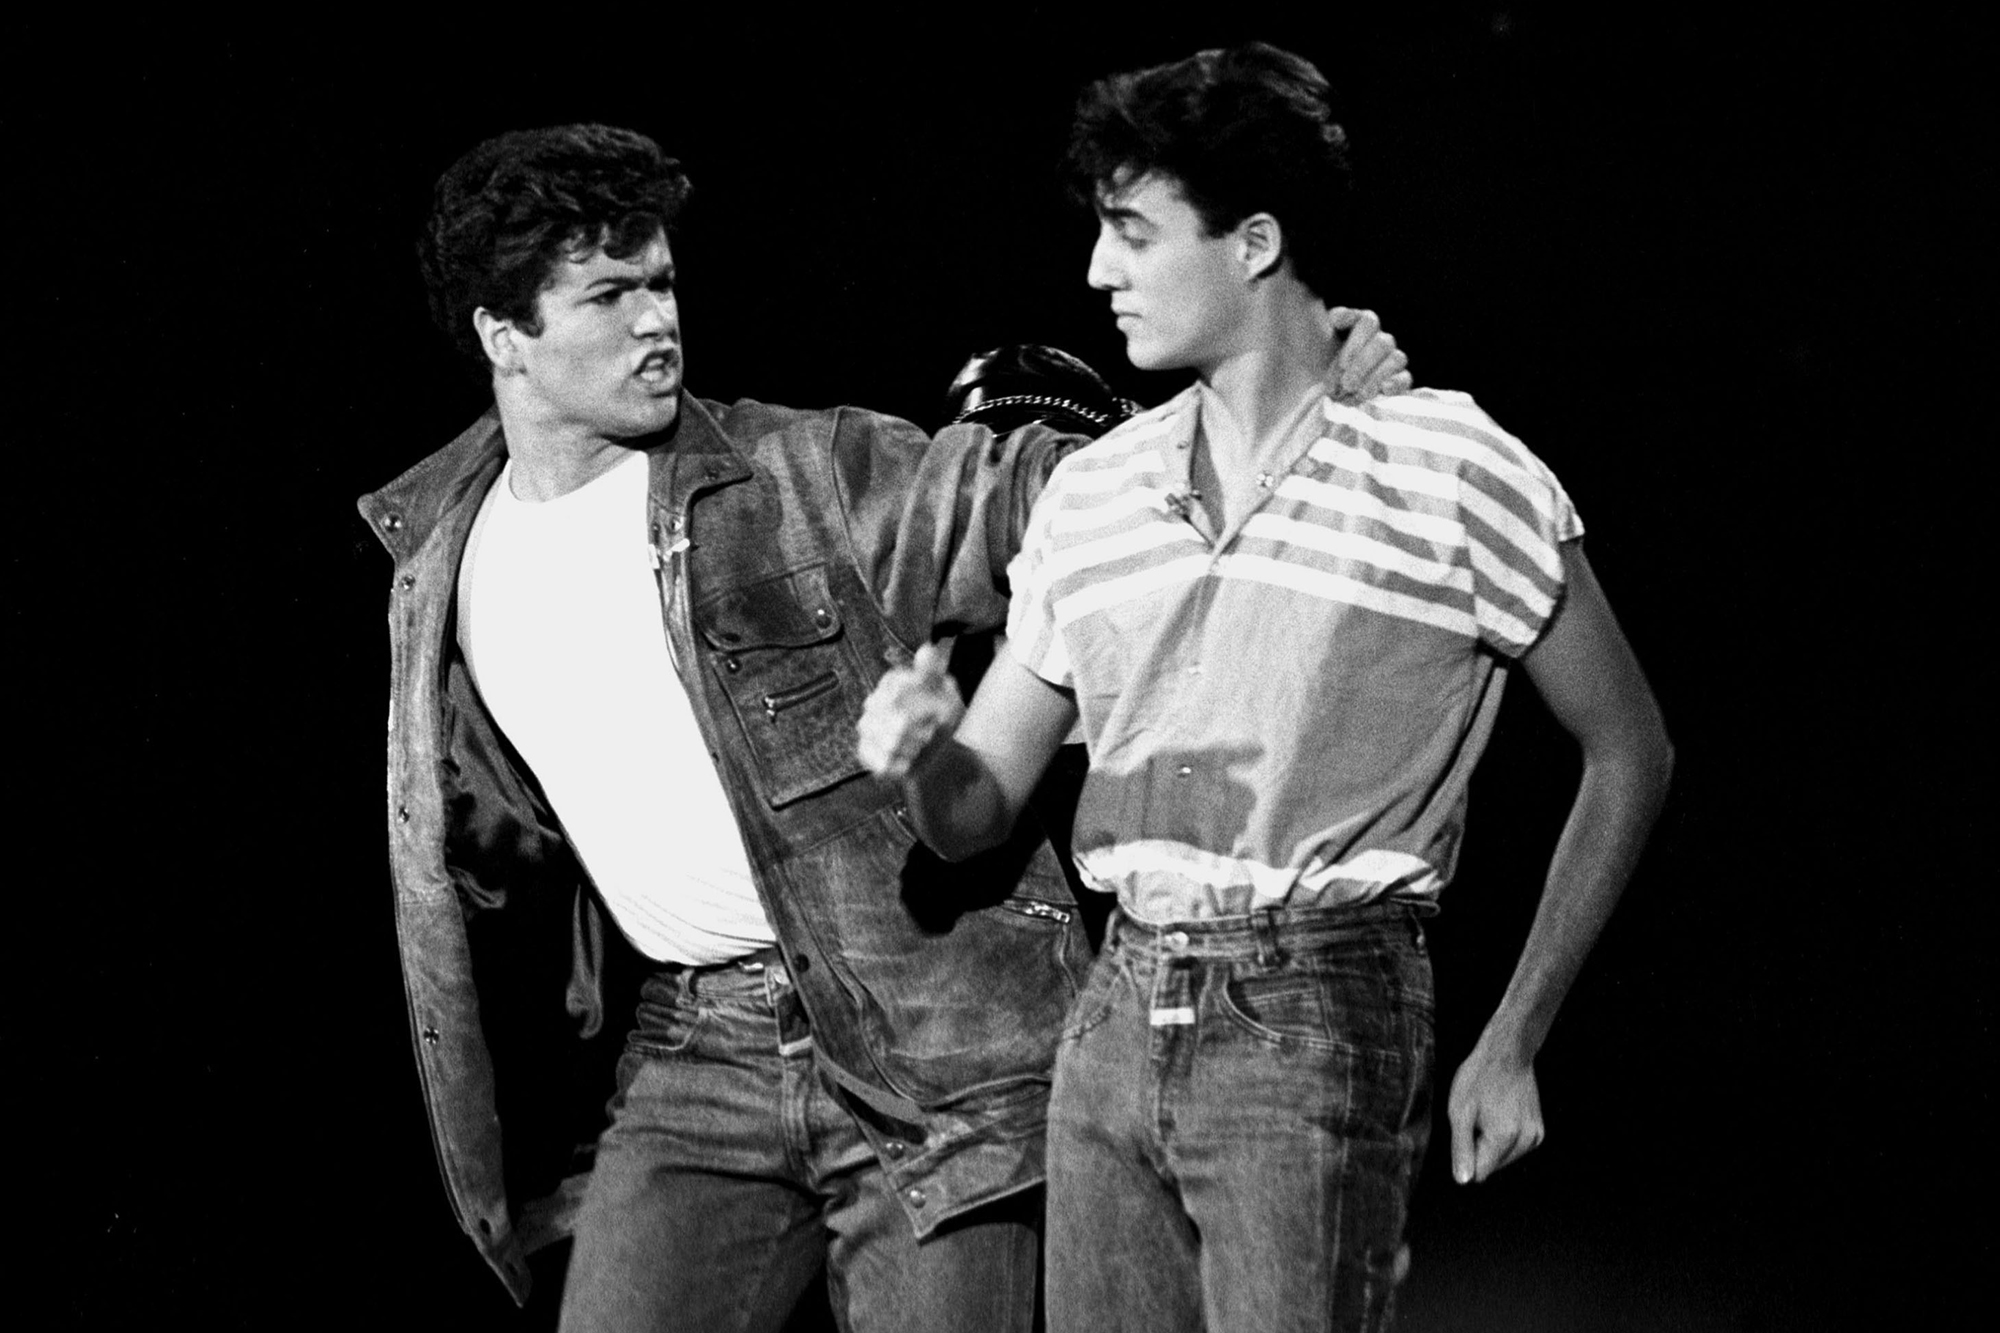 George Michael and Andrew Ridgeley of Wham! perform on the Solid Gold during their first American television appearance, on Nov. 12, 1982.